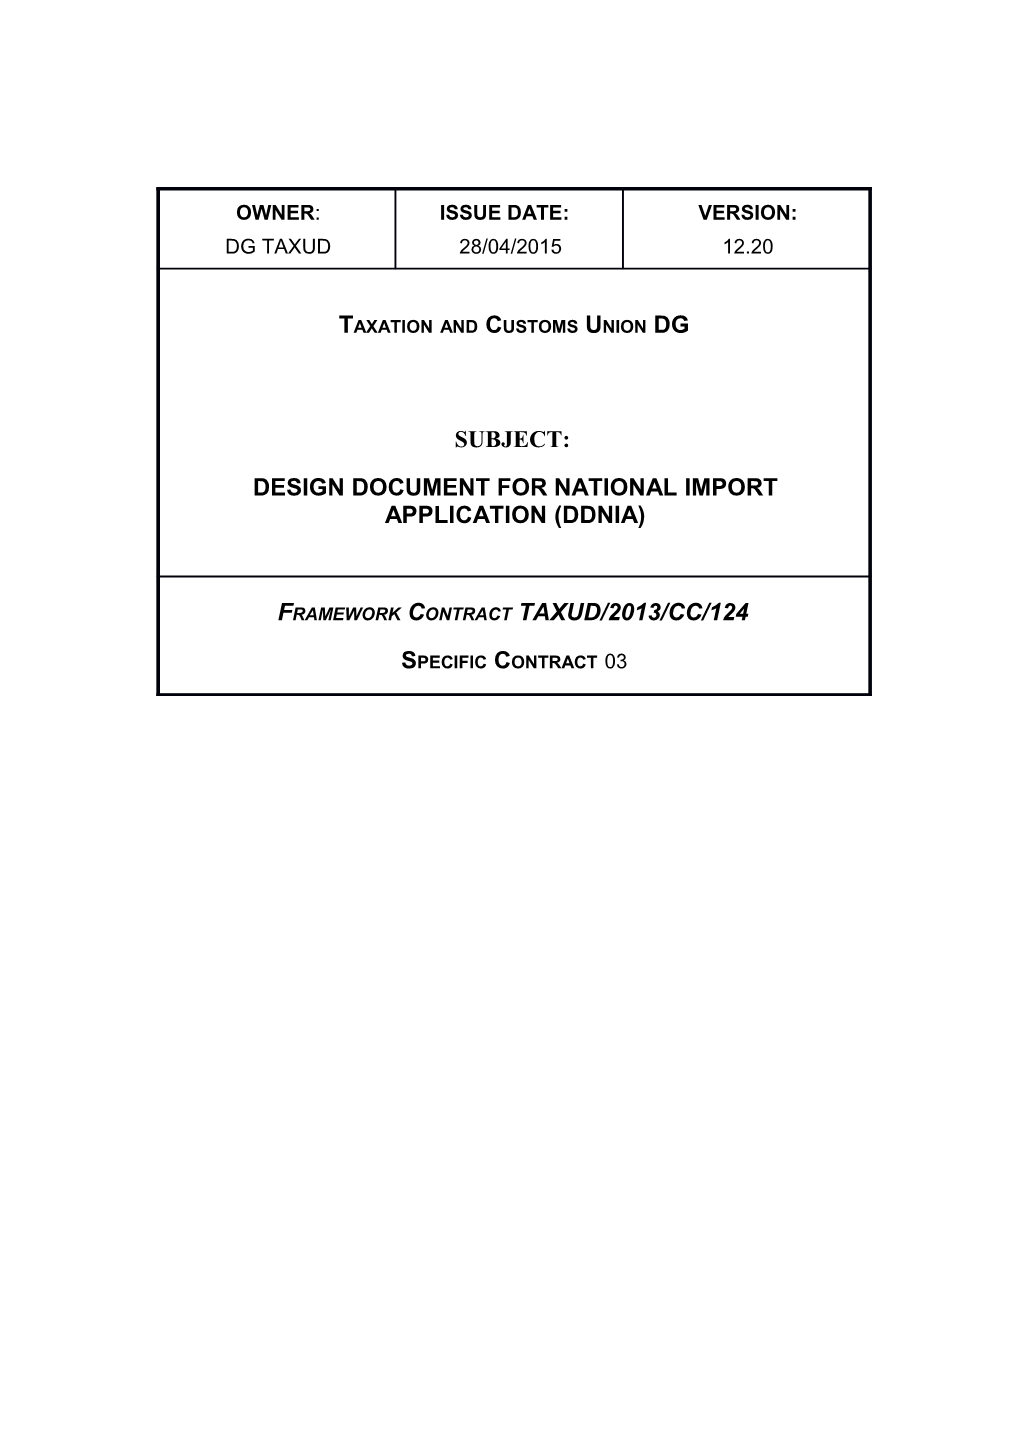 Design Document for National Import Application (DDNIA)